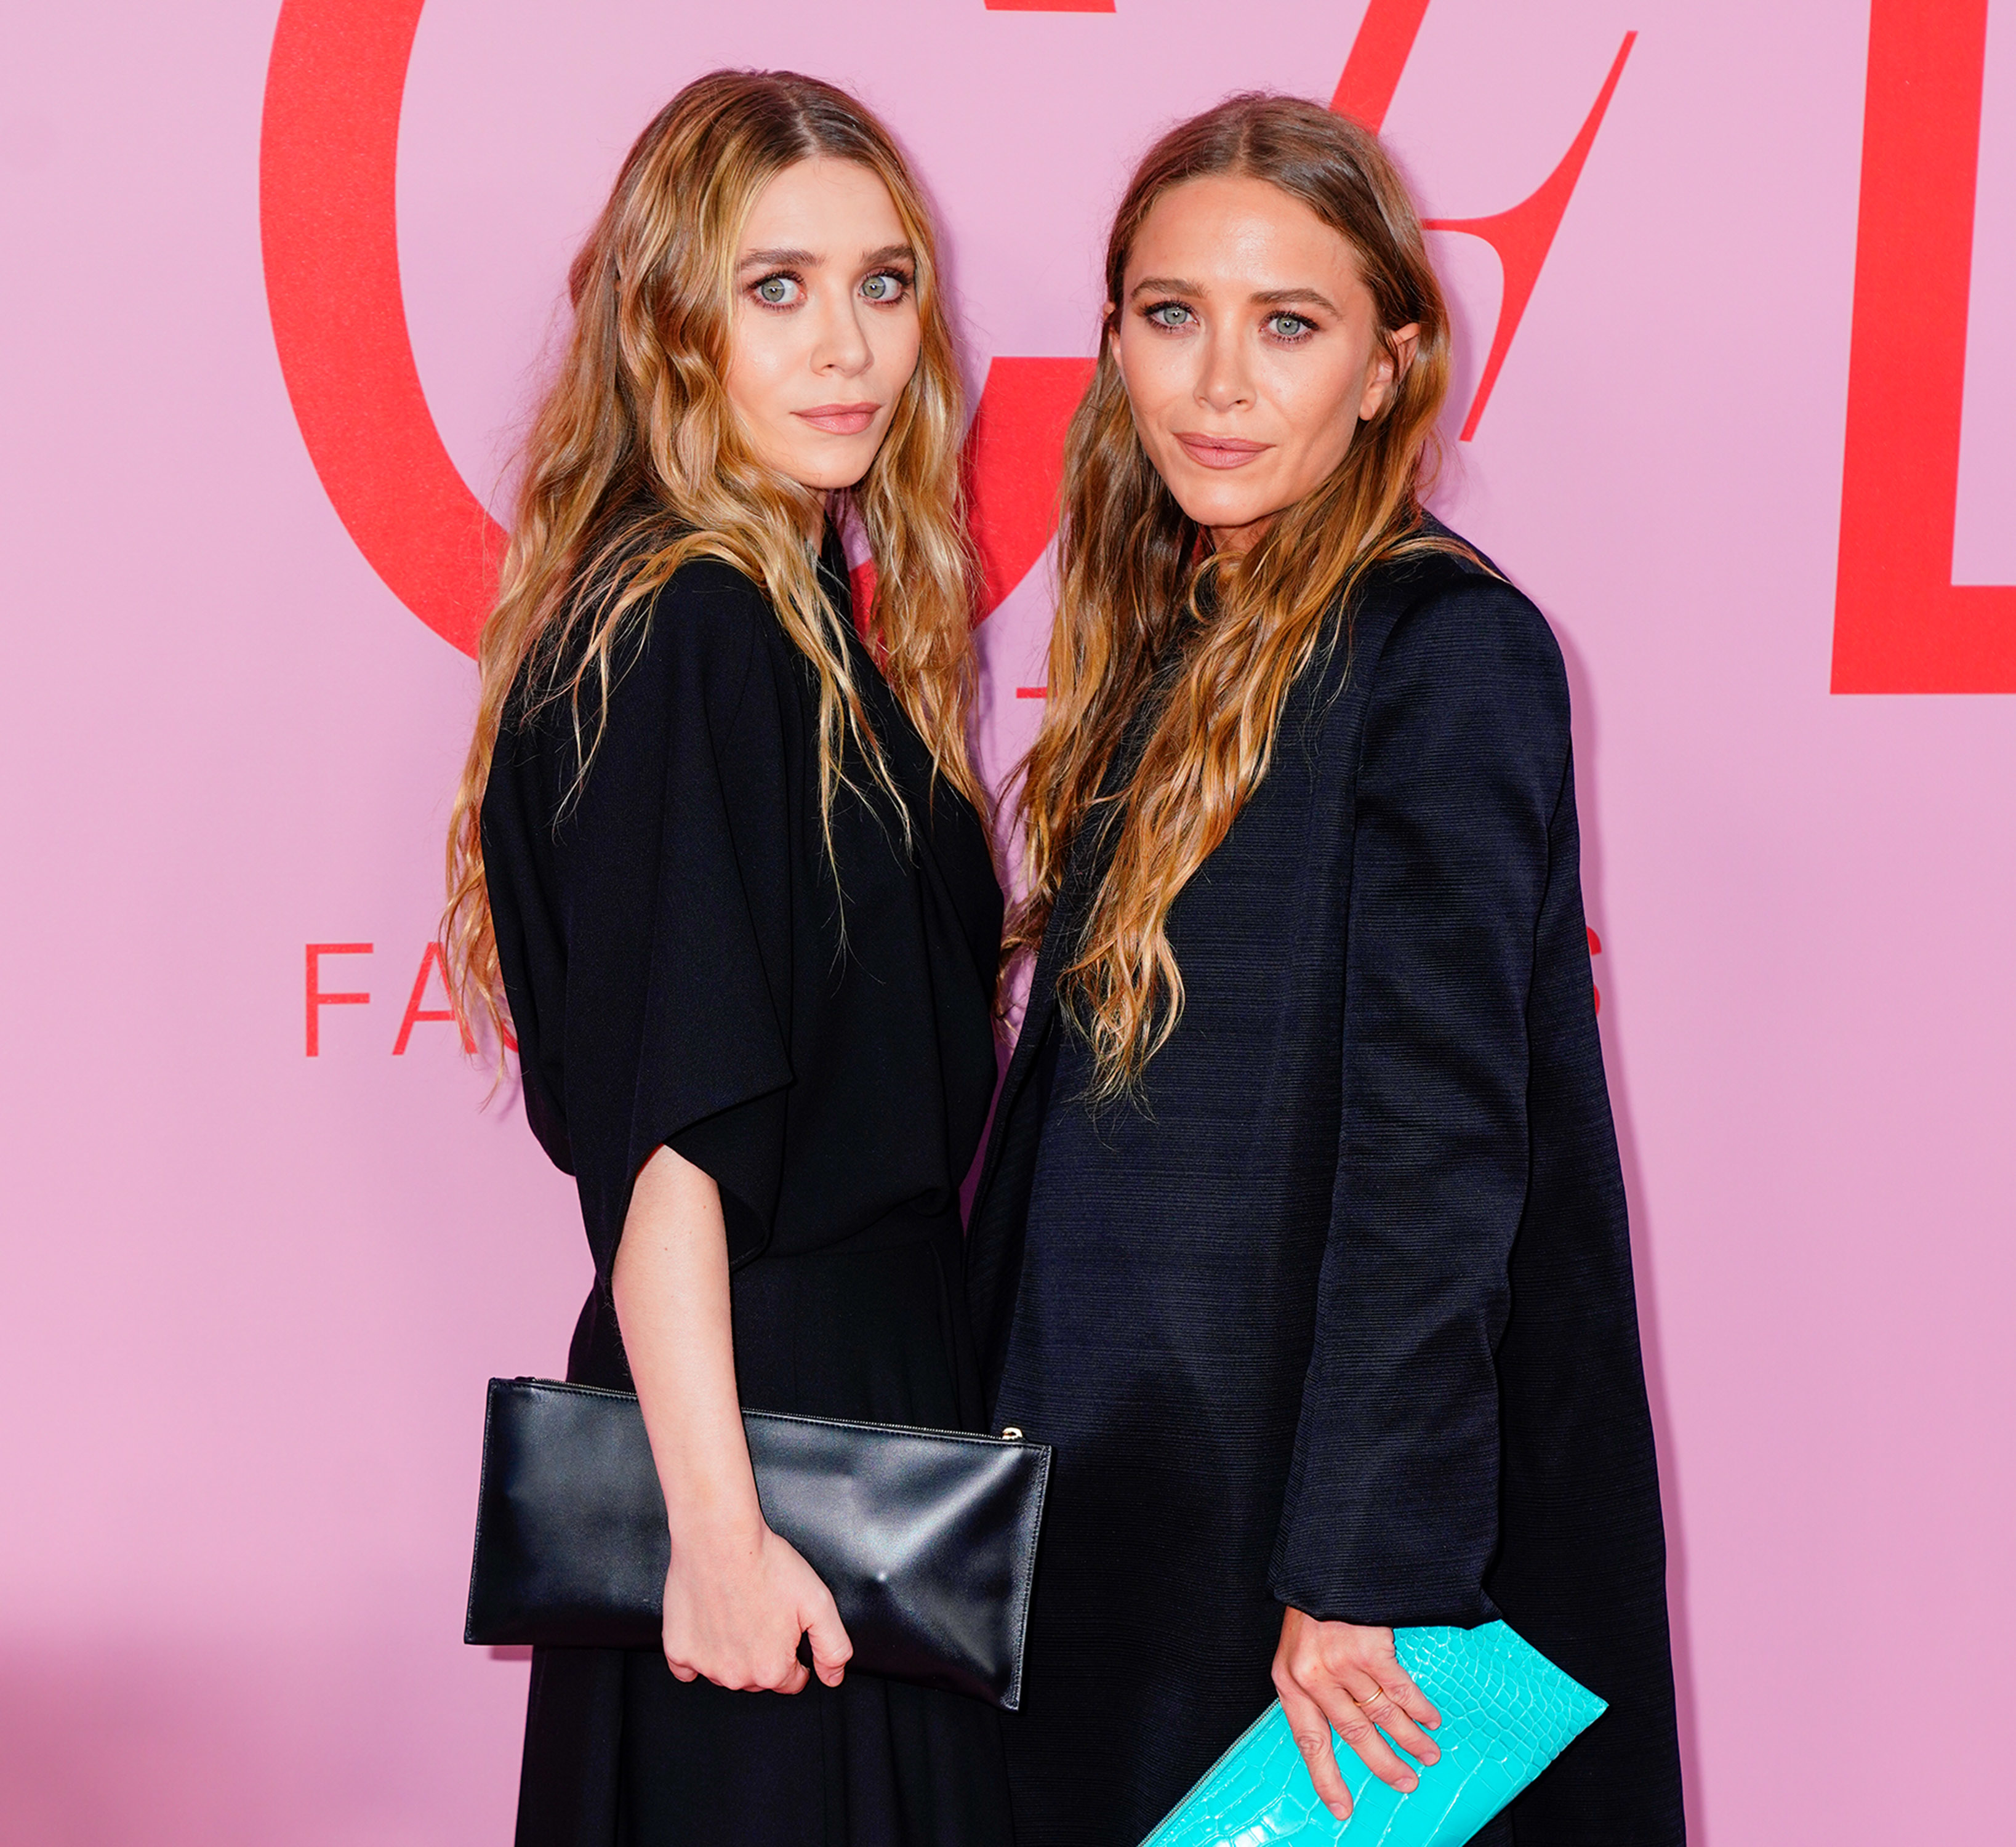 Mary-Kate and Ashley facing each other and holding purses and wearing dark outfits